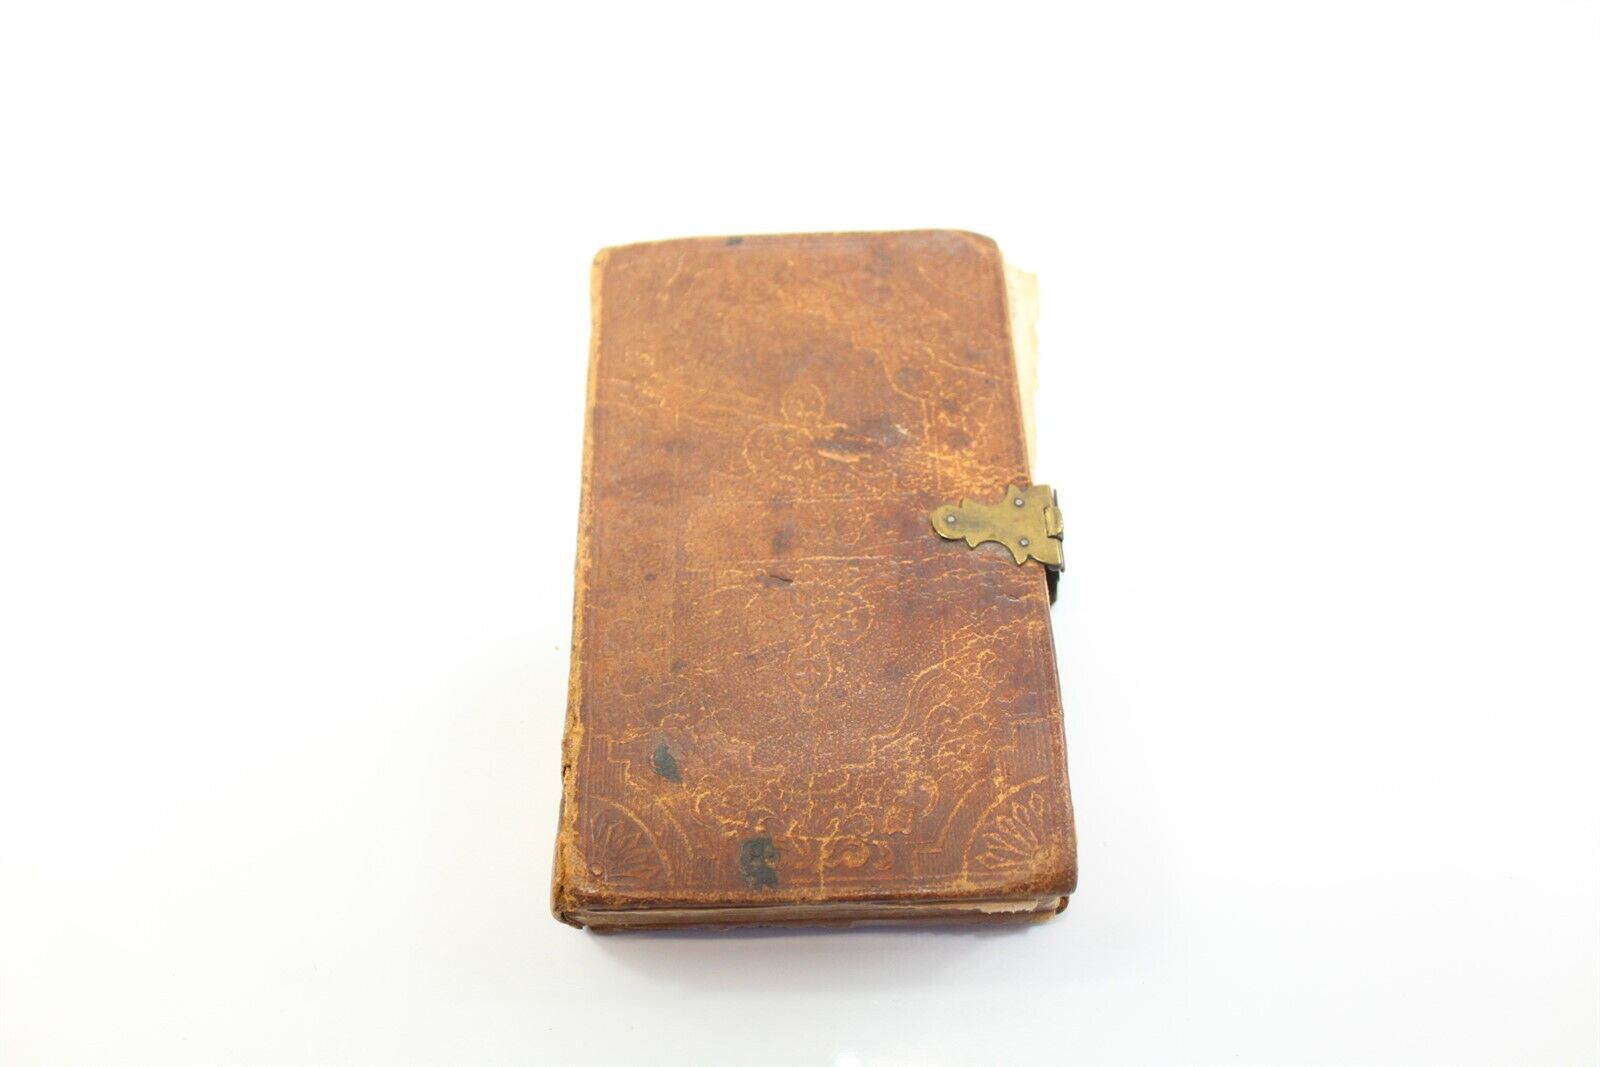  Leather Bound Pocket New Testament with Brass Clasp Antique